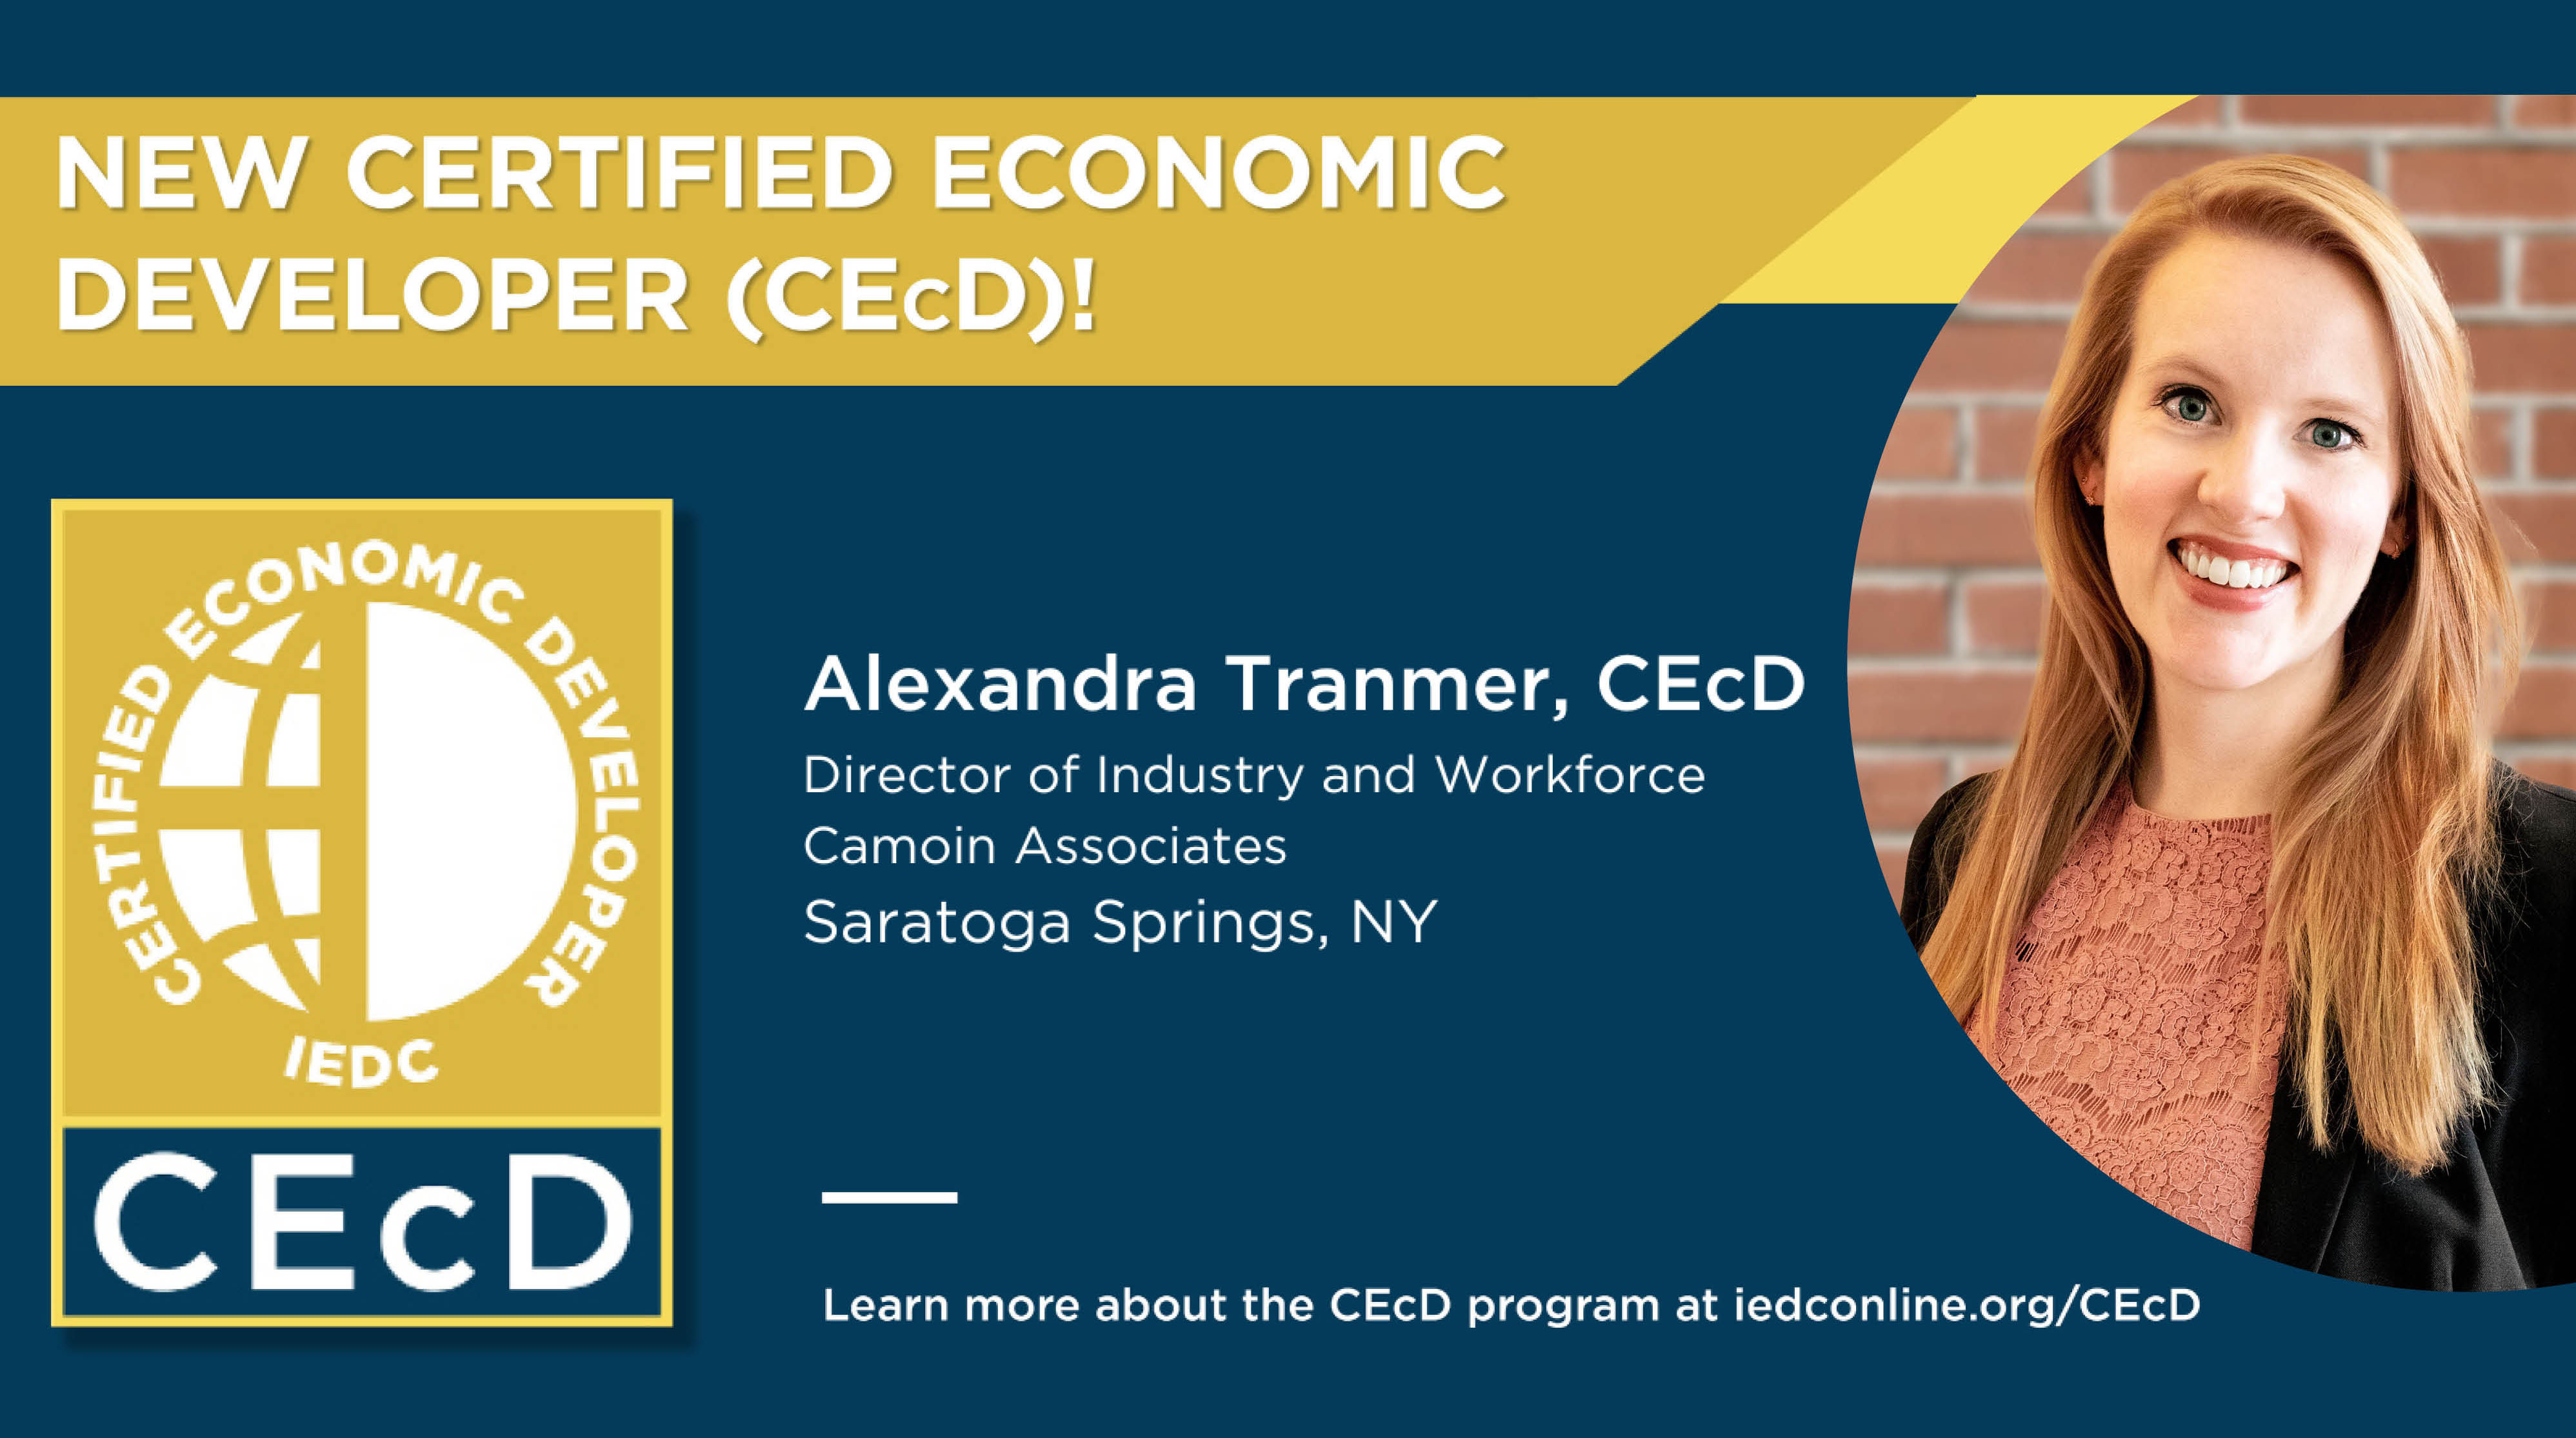 New Certified Economic Developer (CEcD) Alexandra Tranmer, Director of Industry and Workforce at Camoin Associates. Click to learn more about the CEcD program.